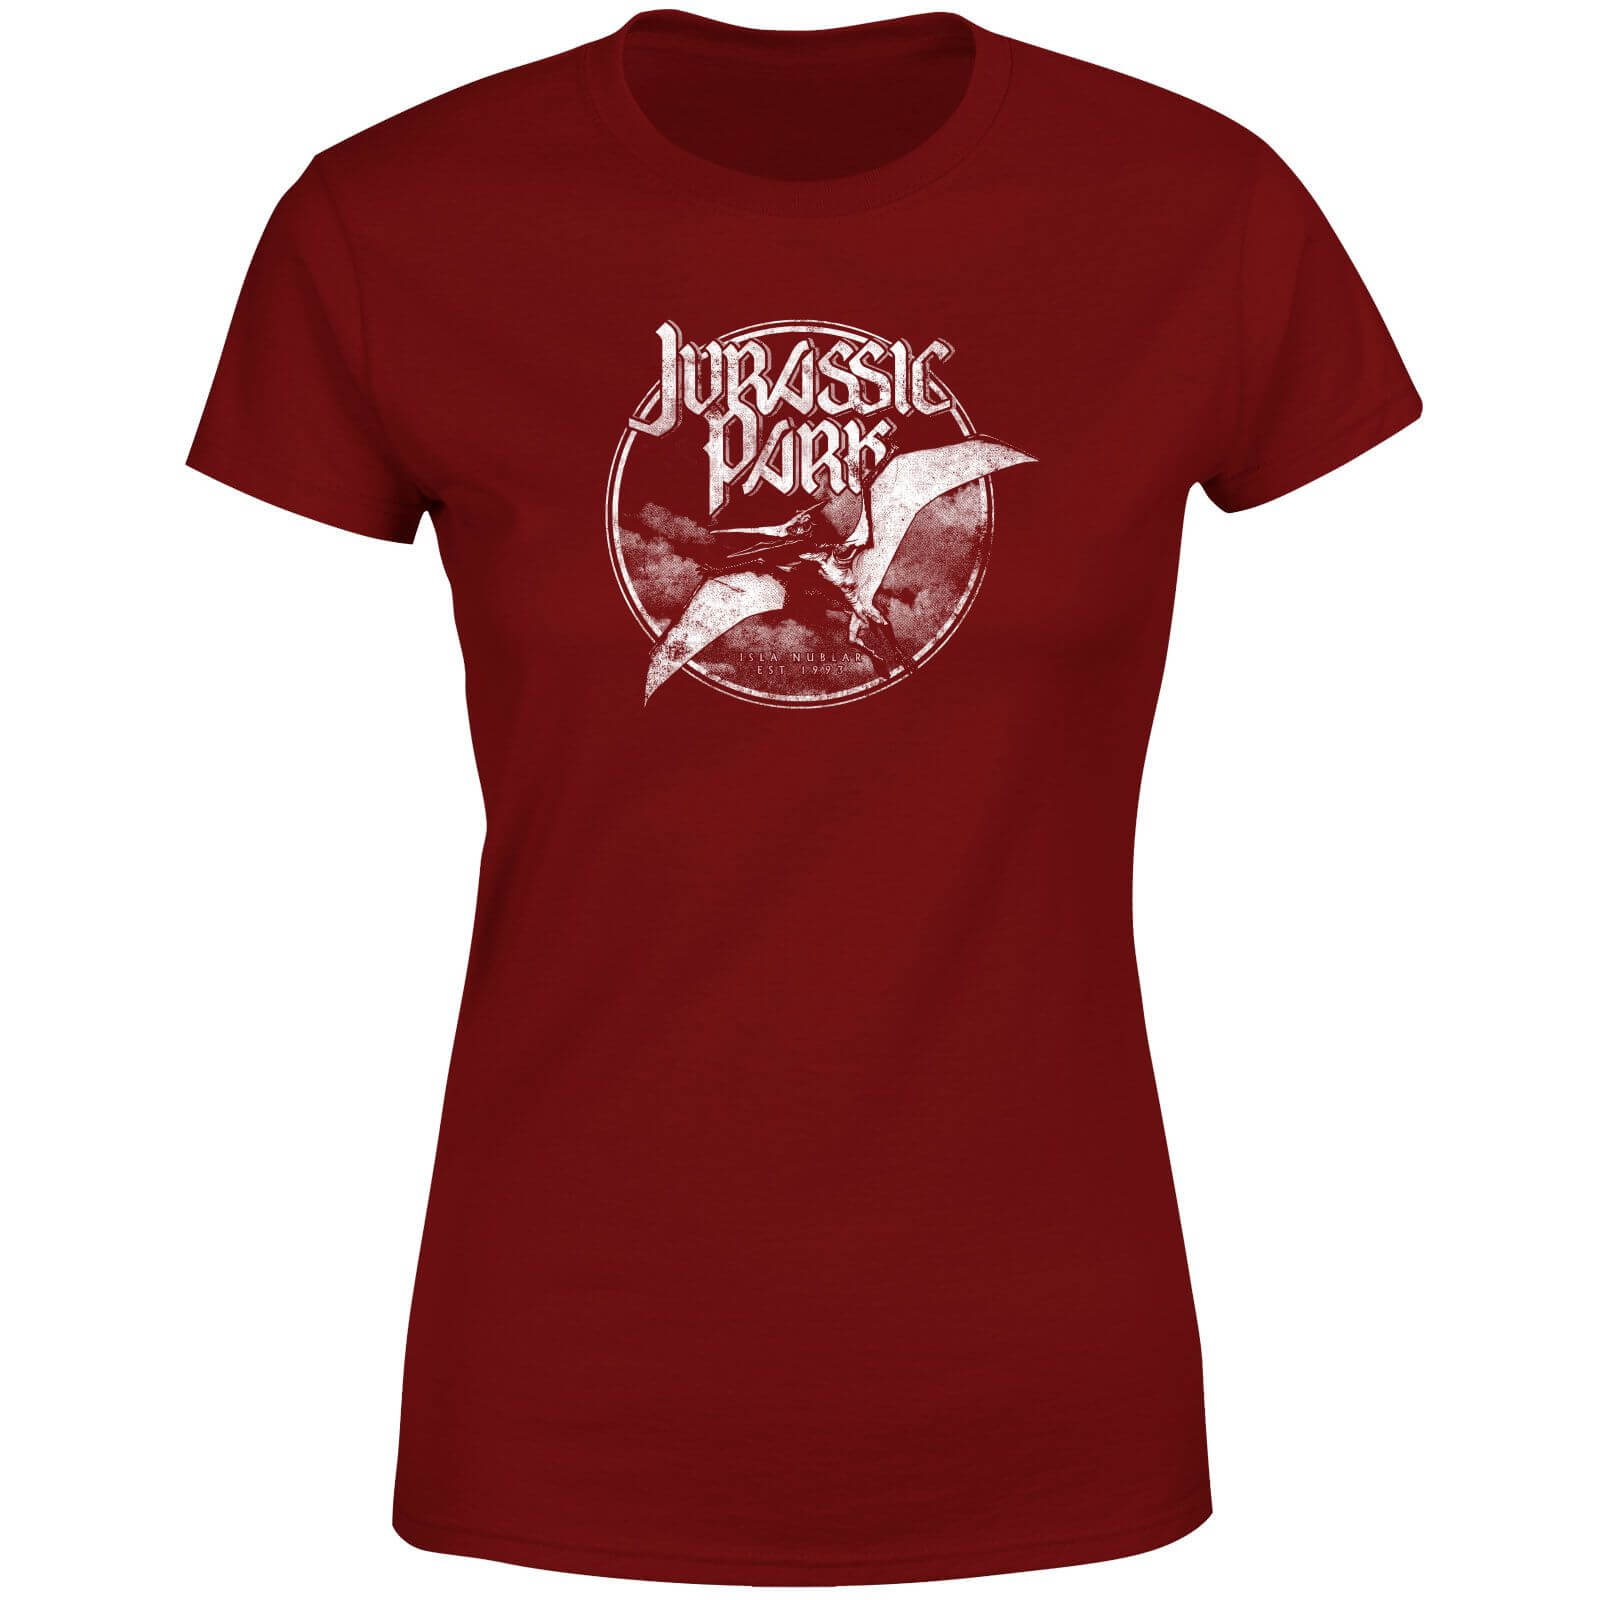 View the best prices for: jurassic park flying threat womens t-shirt